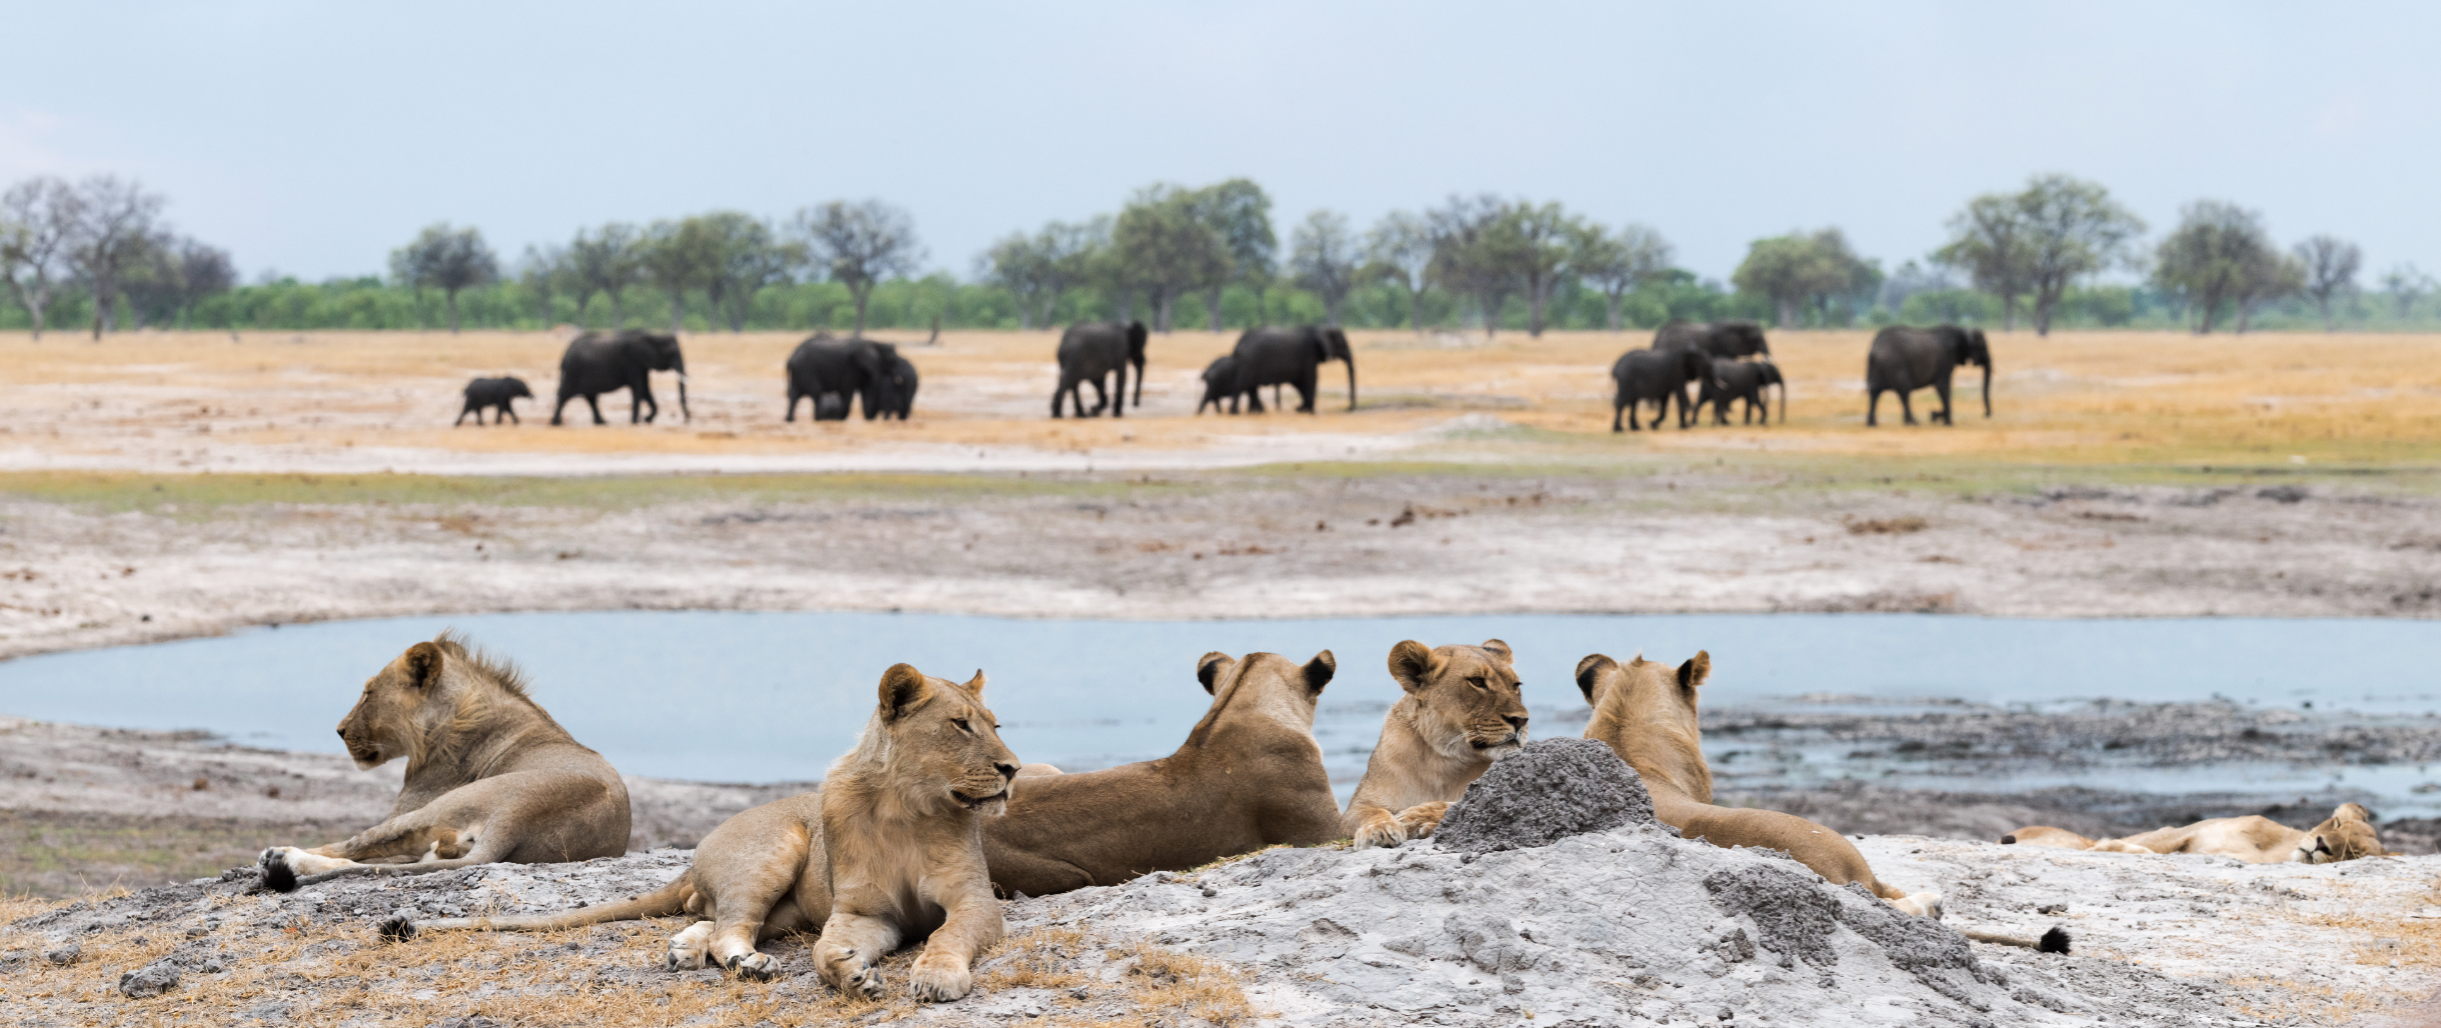 "Herd of elephants in the distance with a pack of lions sitting and observing from a distance"